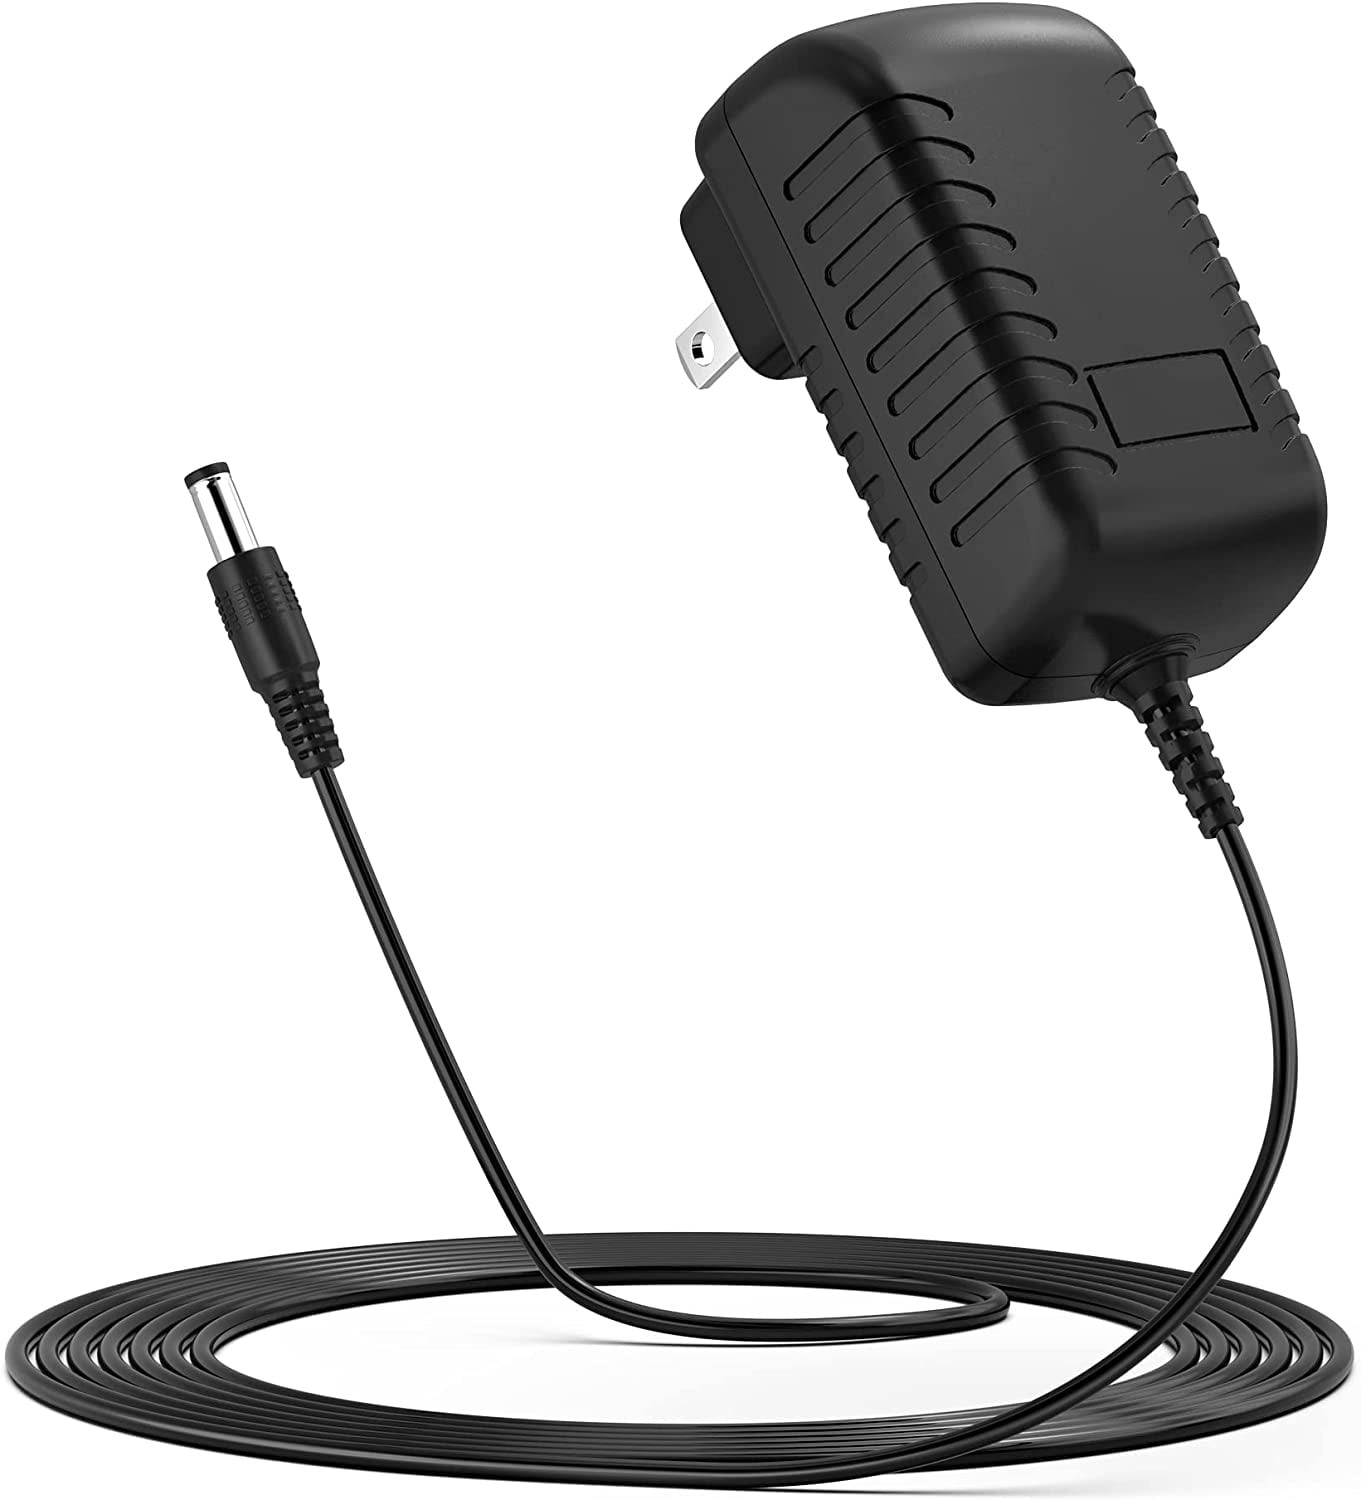 BigNewPowered 12.6V AC Adapter Compatible with HoMedics Therapist